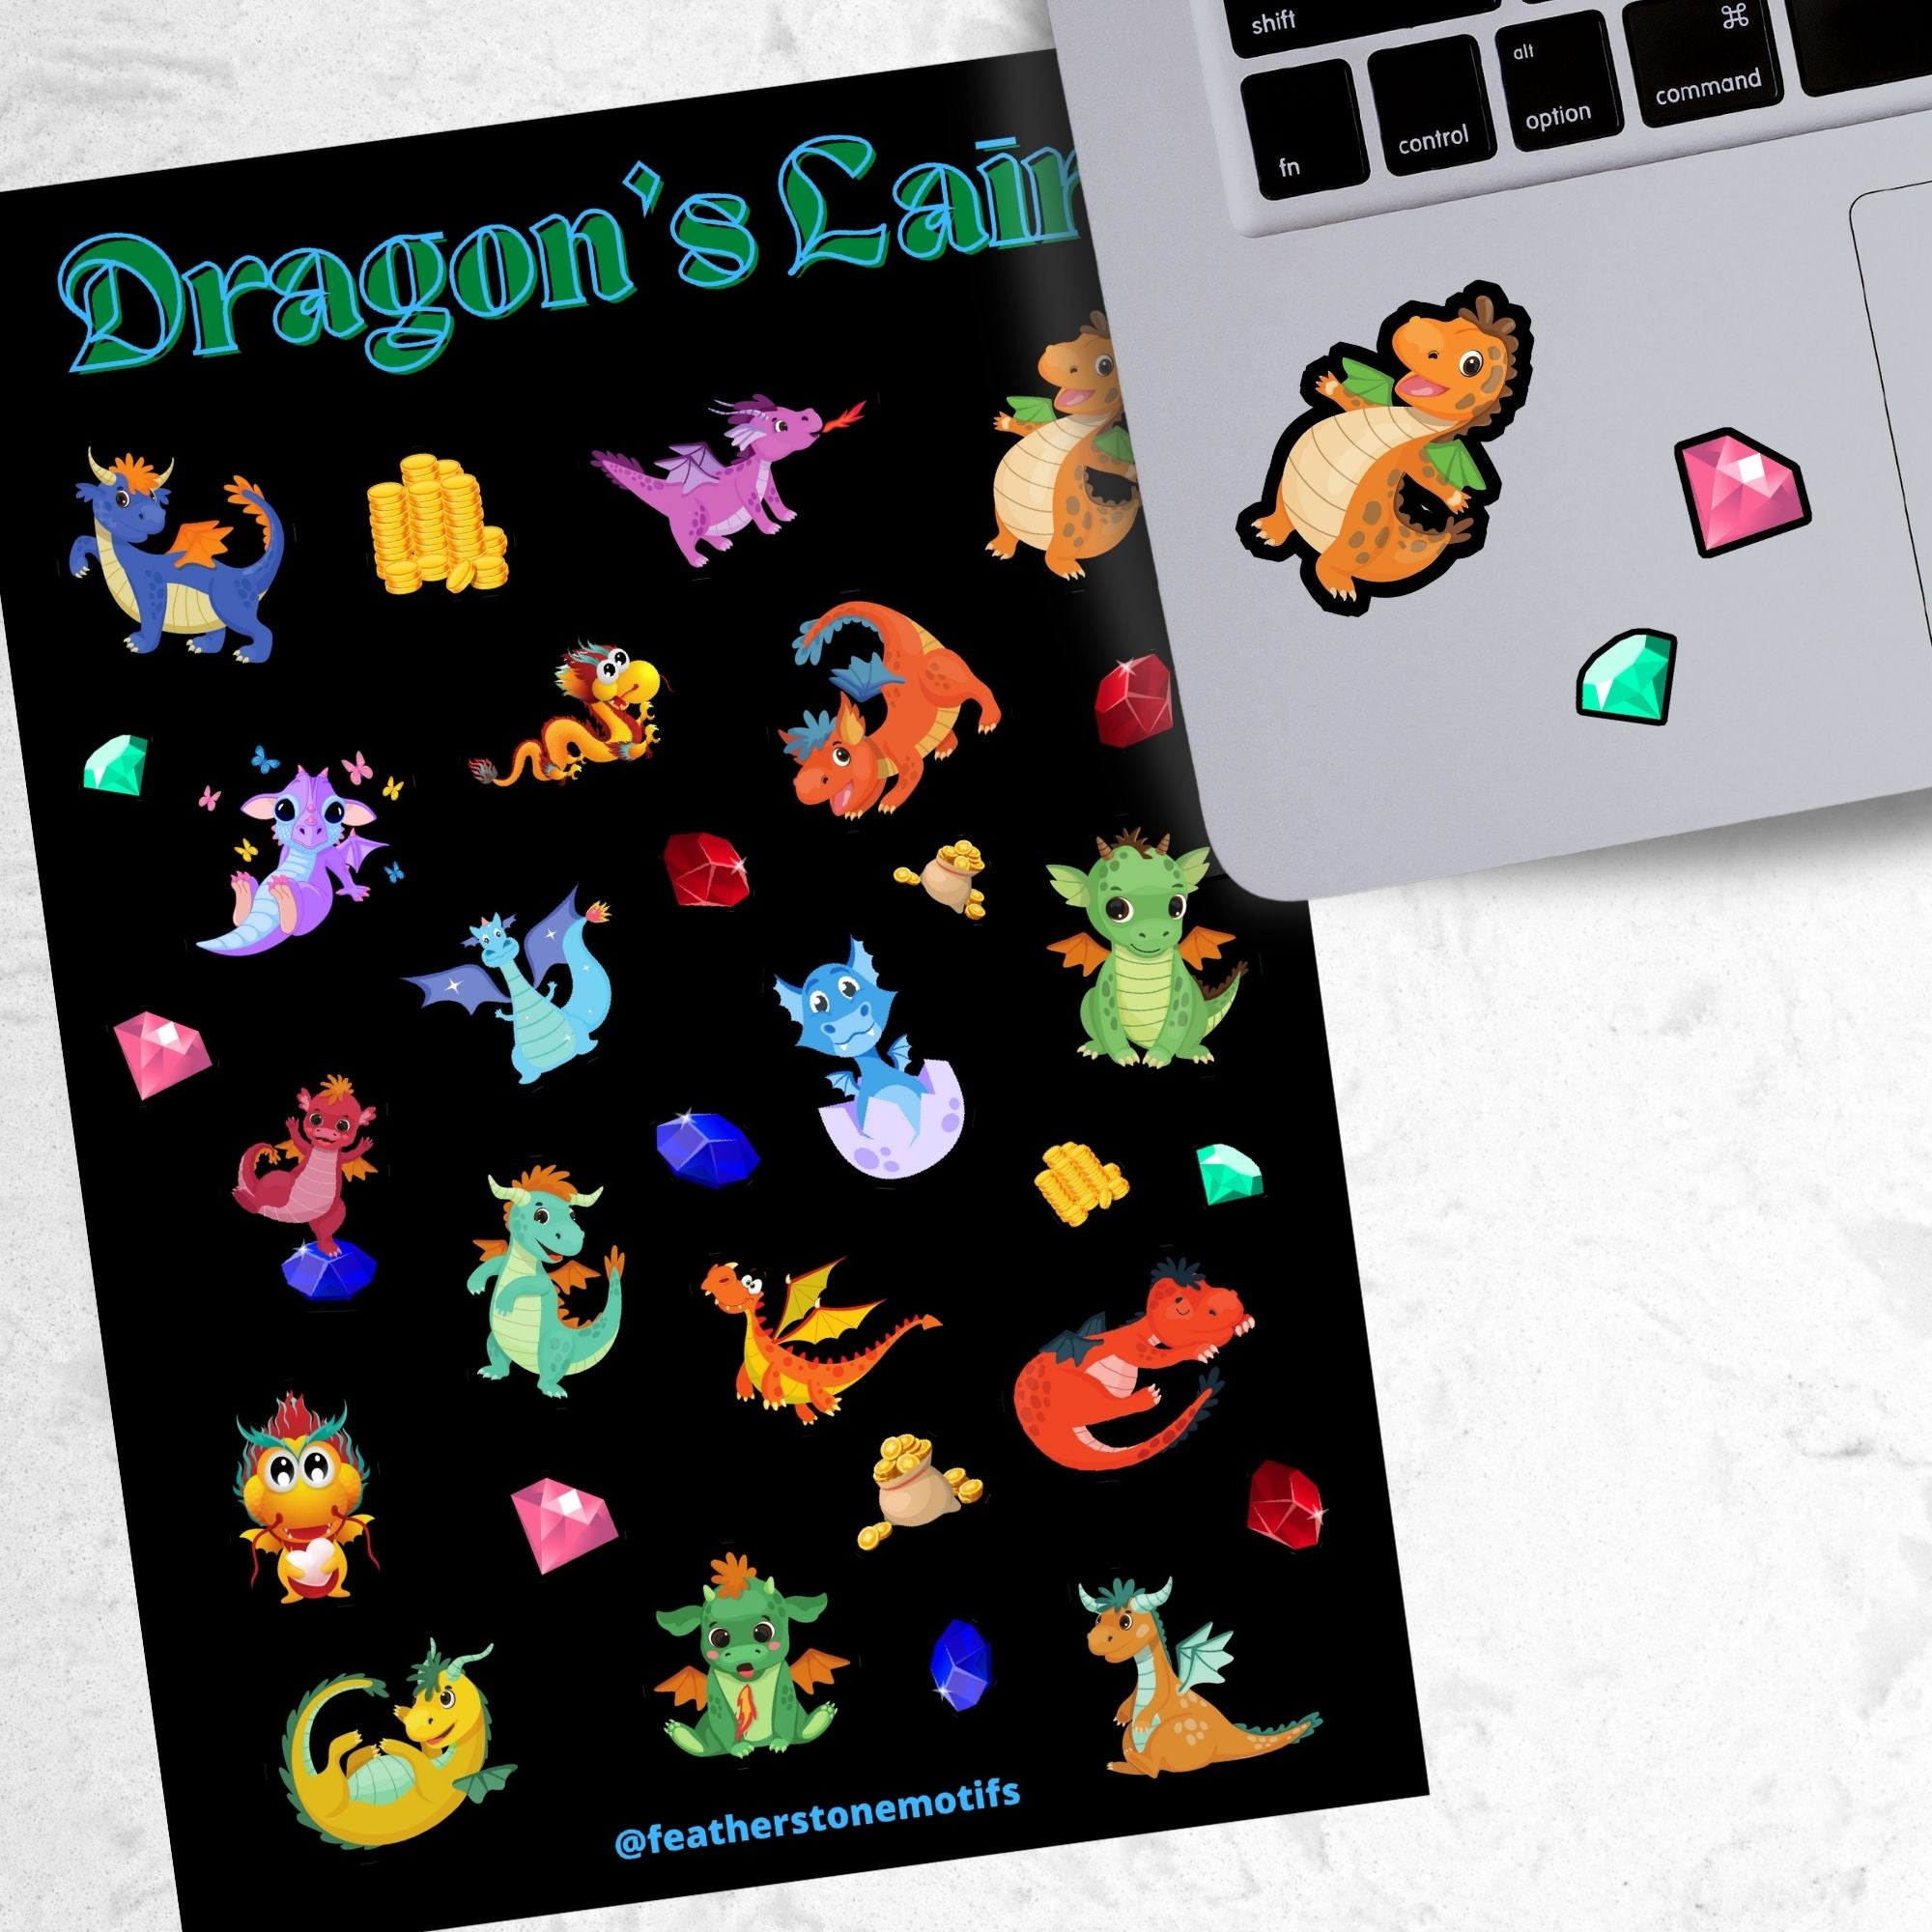 This sticker sheet is filled with cute images of baby dragons, and of course their treasure! This image shows the sticker sheet next to an open laptop with a sticker of an orange dragon with green wings and two gem stickers applied below the keyboard.